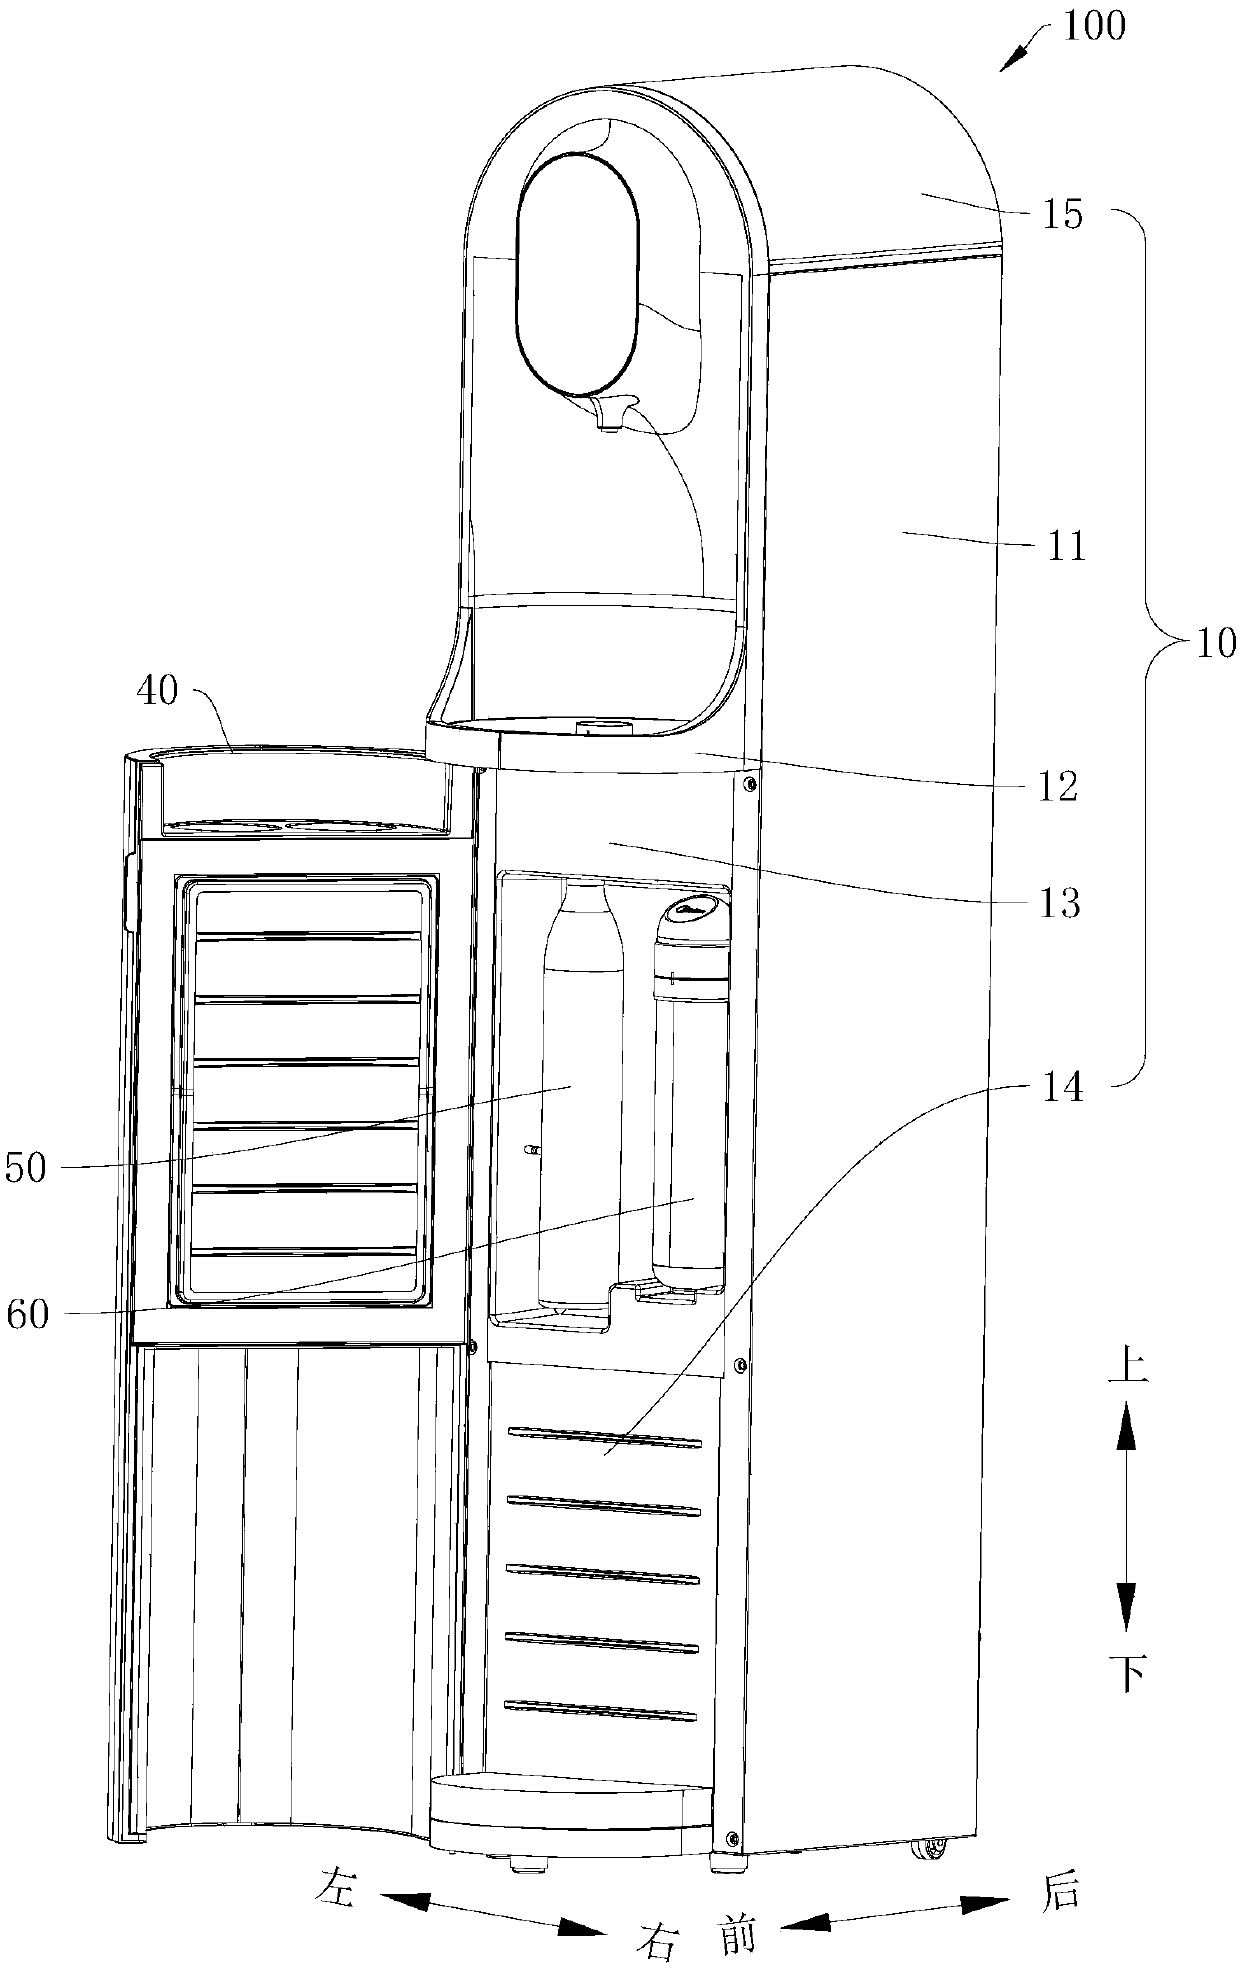 Water treatment device